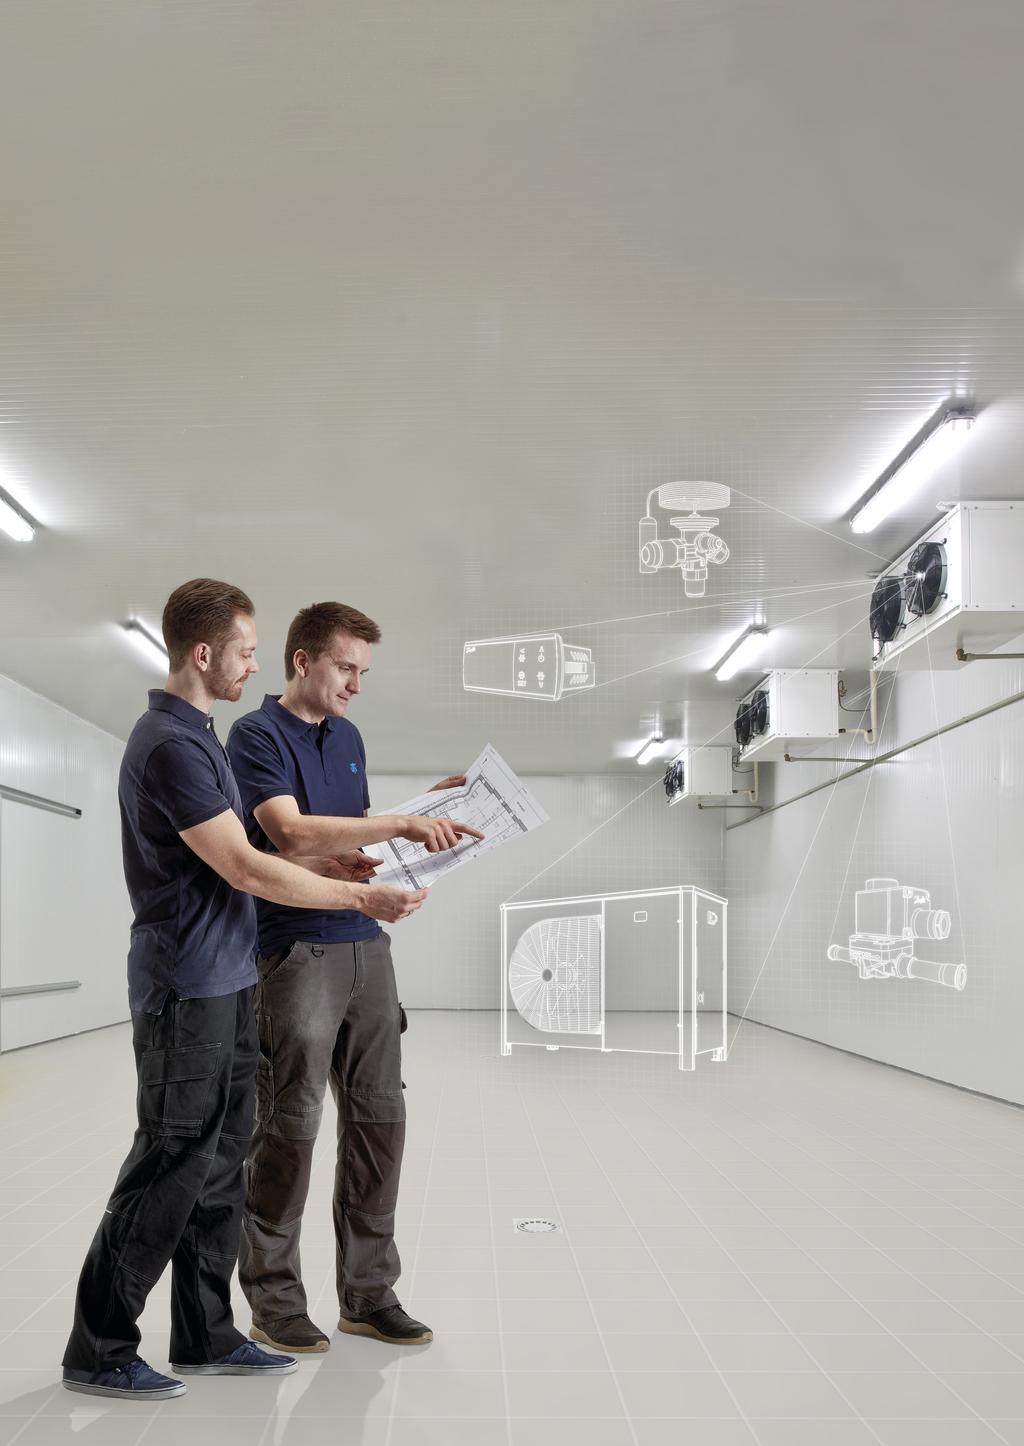 Danfoss Solutions for Cold Rooms - Installers/Contractors, Europe Go Beyond Cool With Danfoss, you get more than reliable solutions for cold rooms.